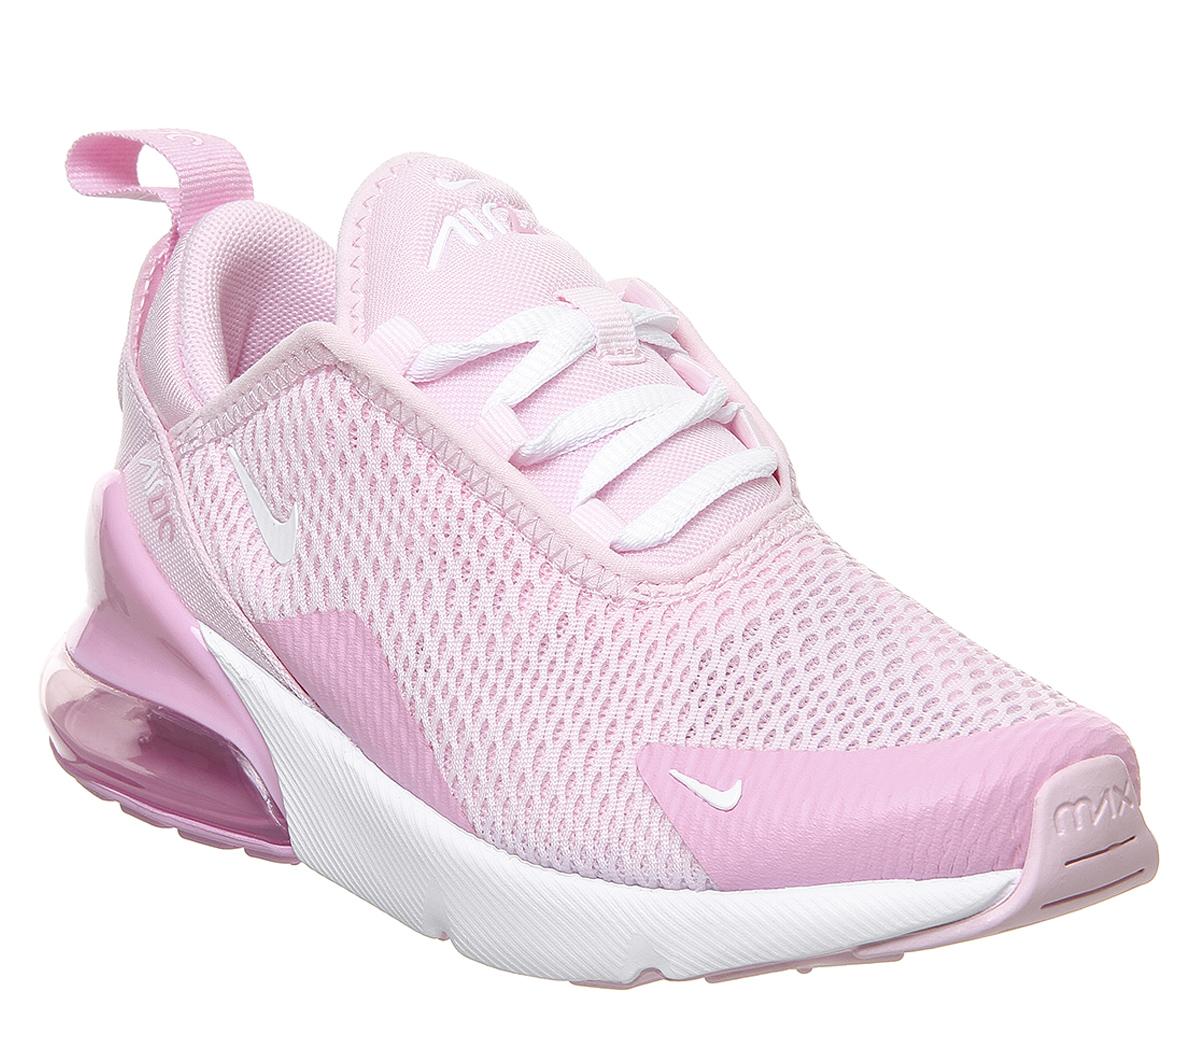 NikeAir Max 270 Ps TrainersPink Foam White Pink Rise